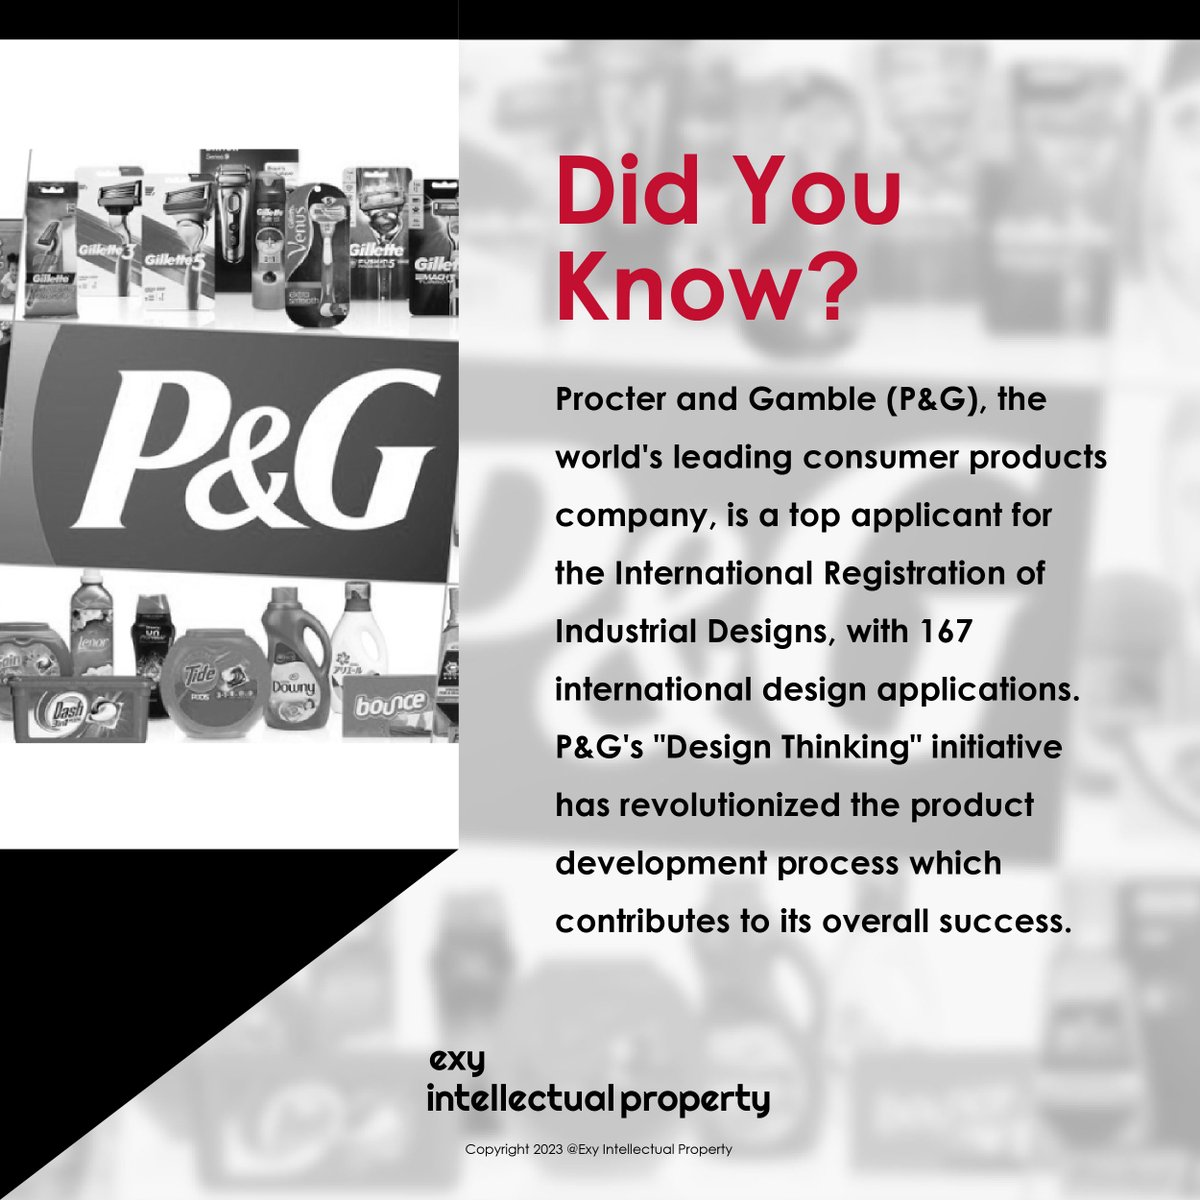 #DidYouKnow P&G found out that Design adds value that often meets the unarticulated needs of consumers and that is how Design plays a key role in the success of the company's extensive product range.

#ExyIP #intellectualproperty #industrialdesign #ProcterAndGamble